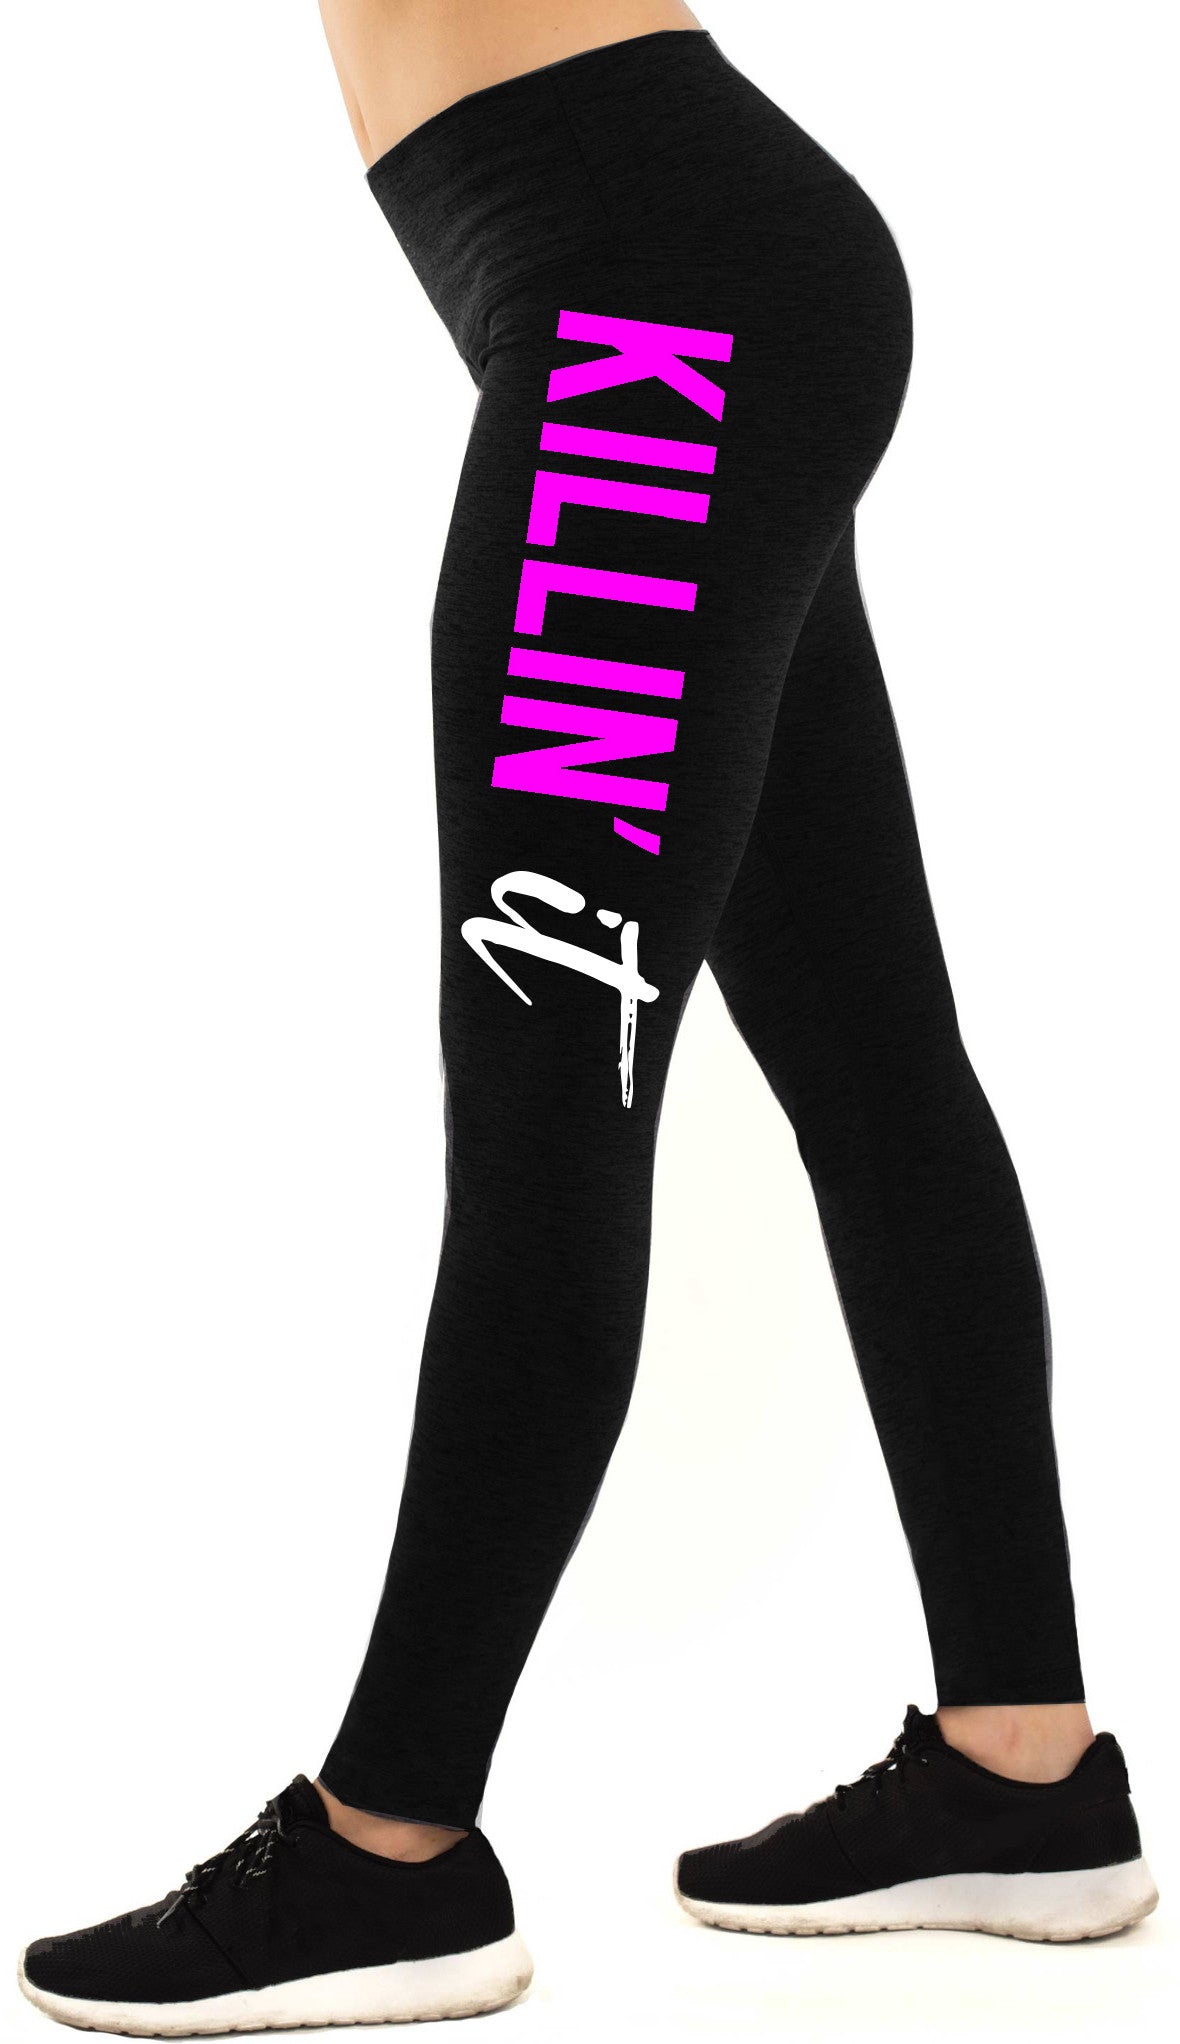 IT and NobullWoman Pink with Workout – Leggings, Black White KILLIN\' Apparel Print